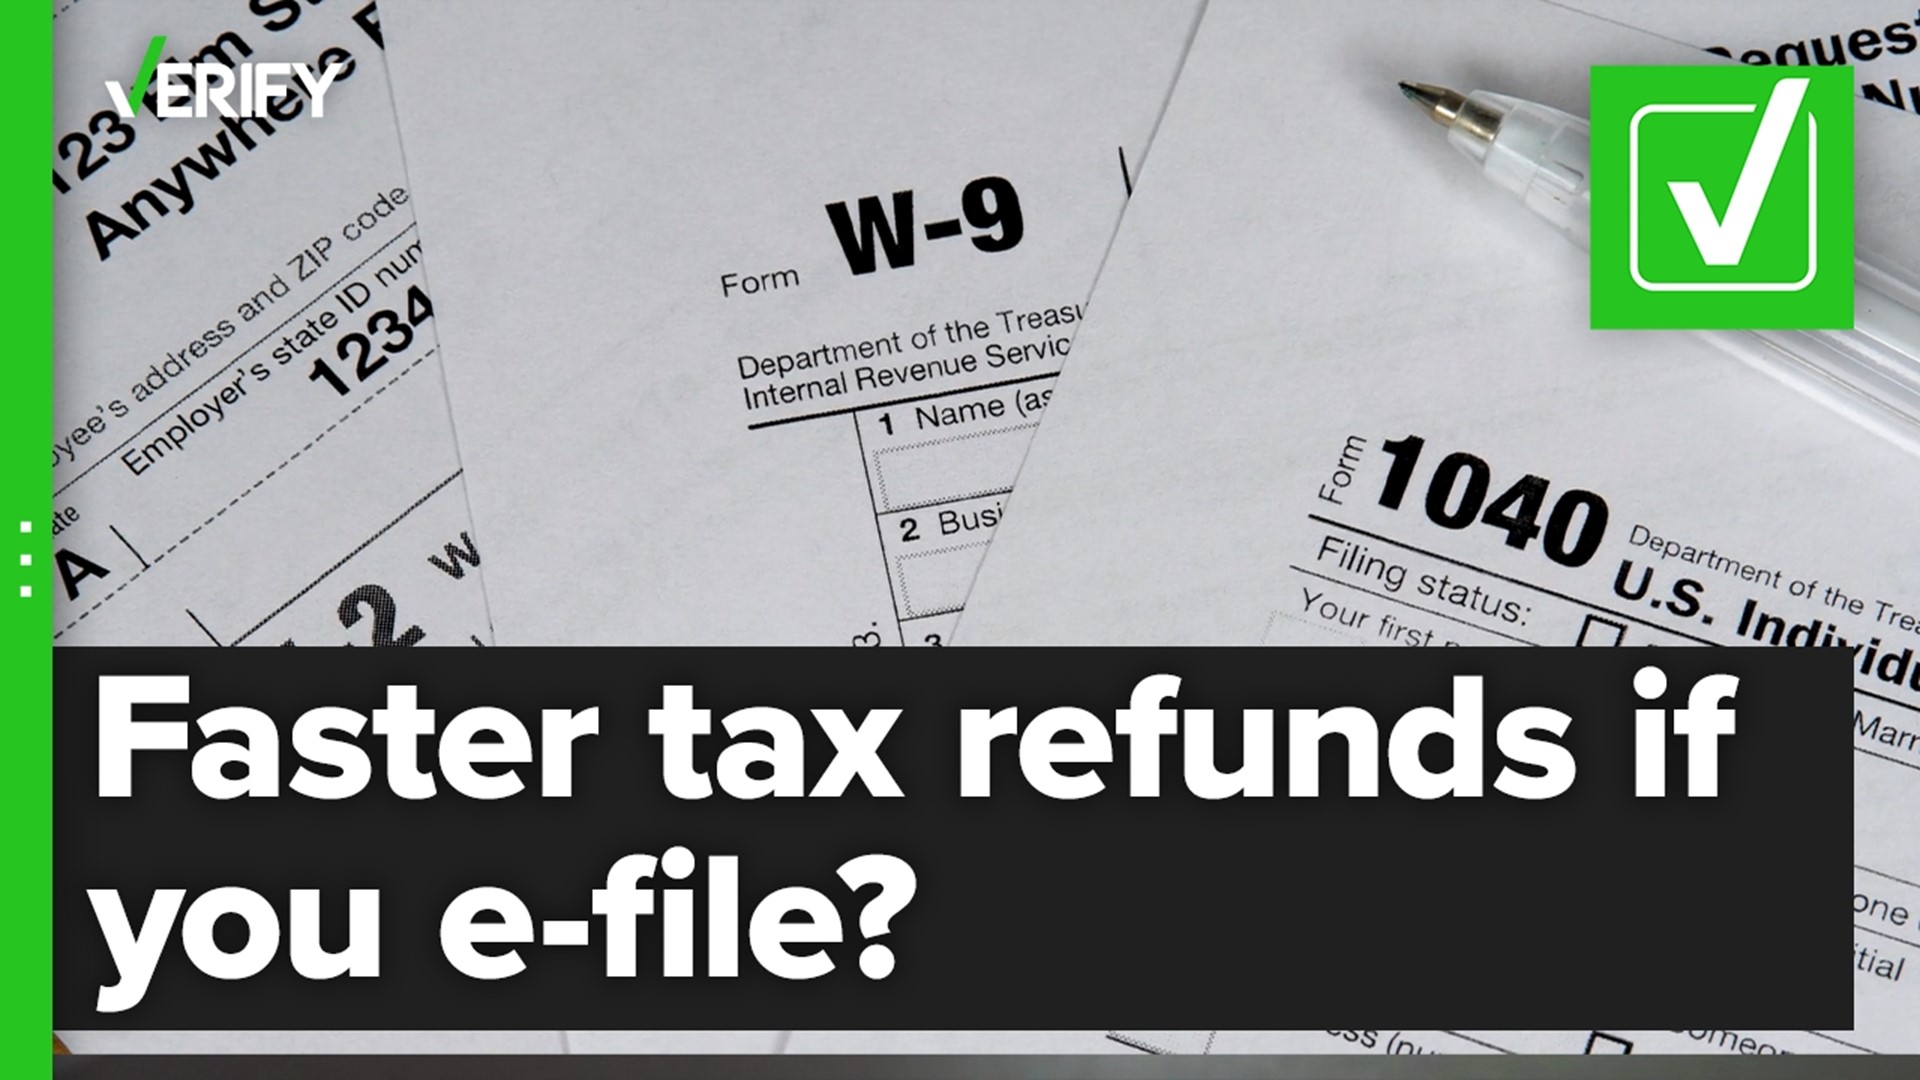 Are you more likely to receive your refund faster if you file your 2021 tax return electronically?  The VERIFY team confirms this is true.